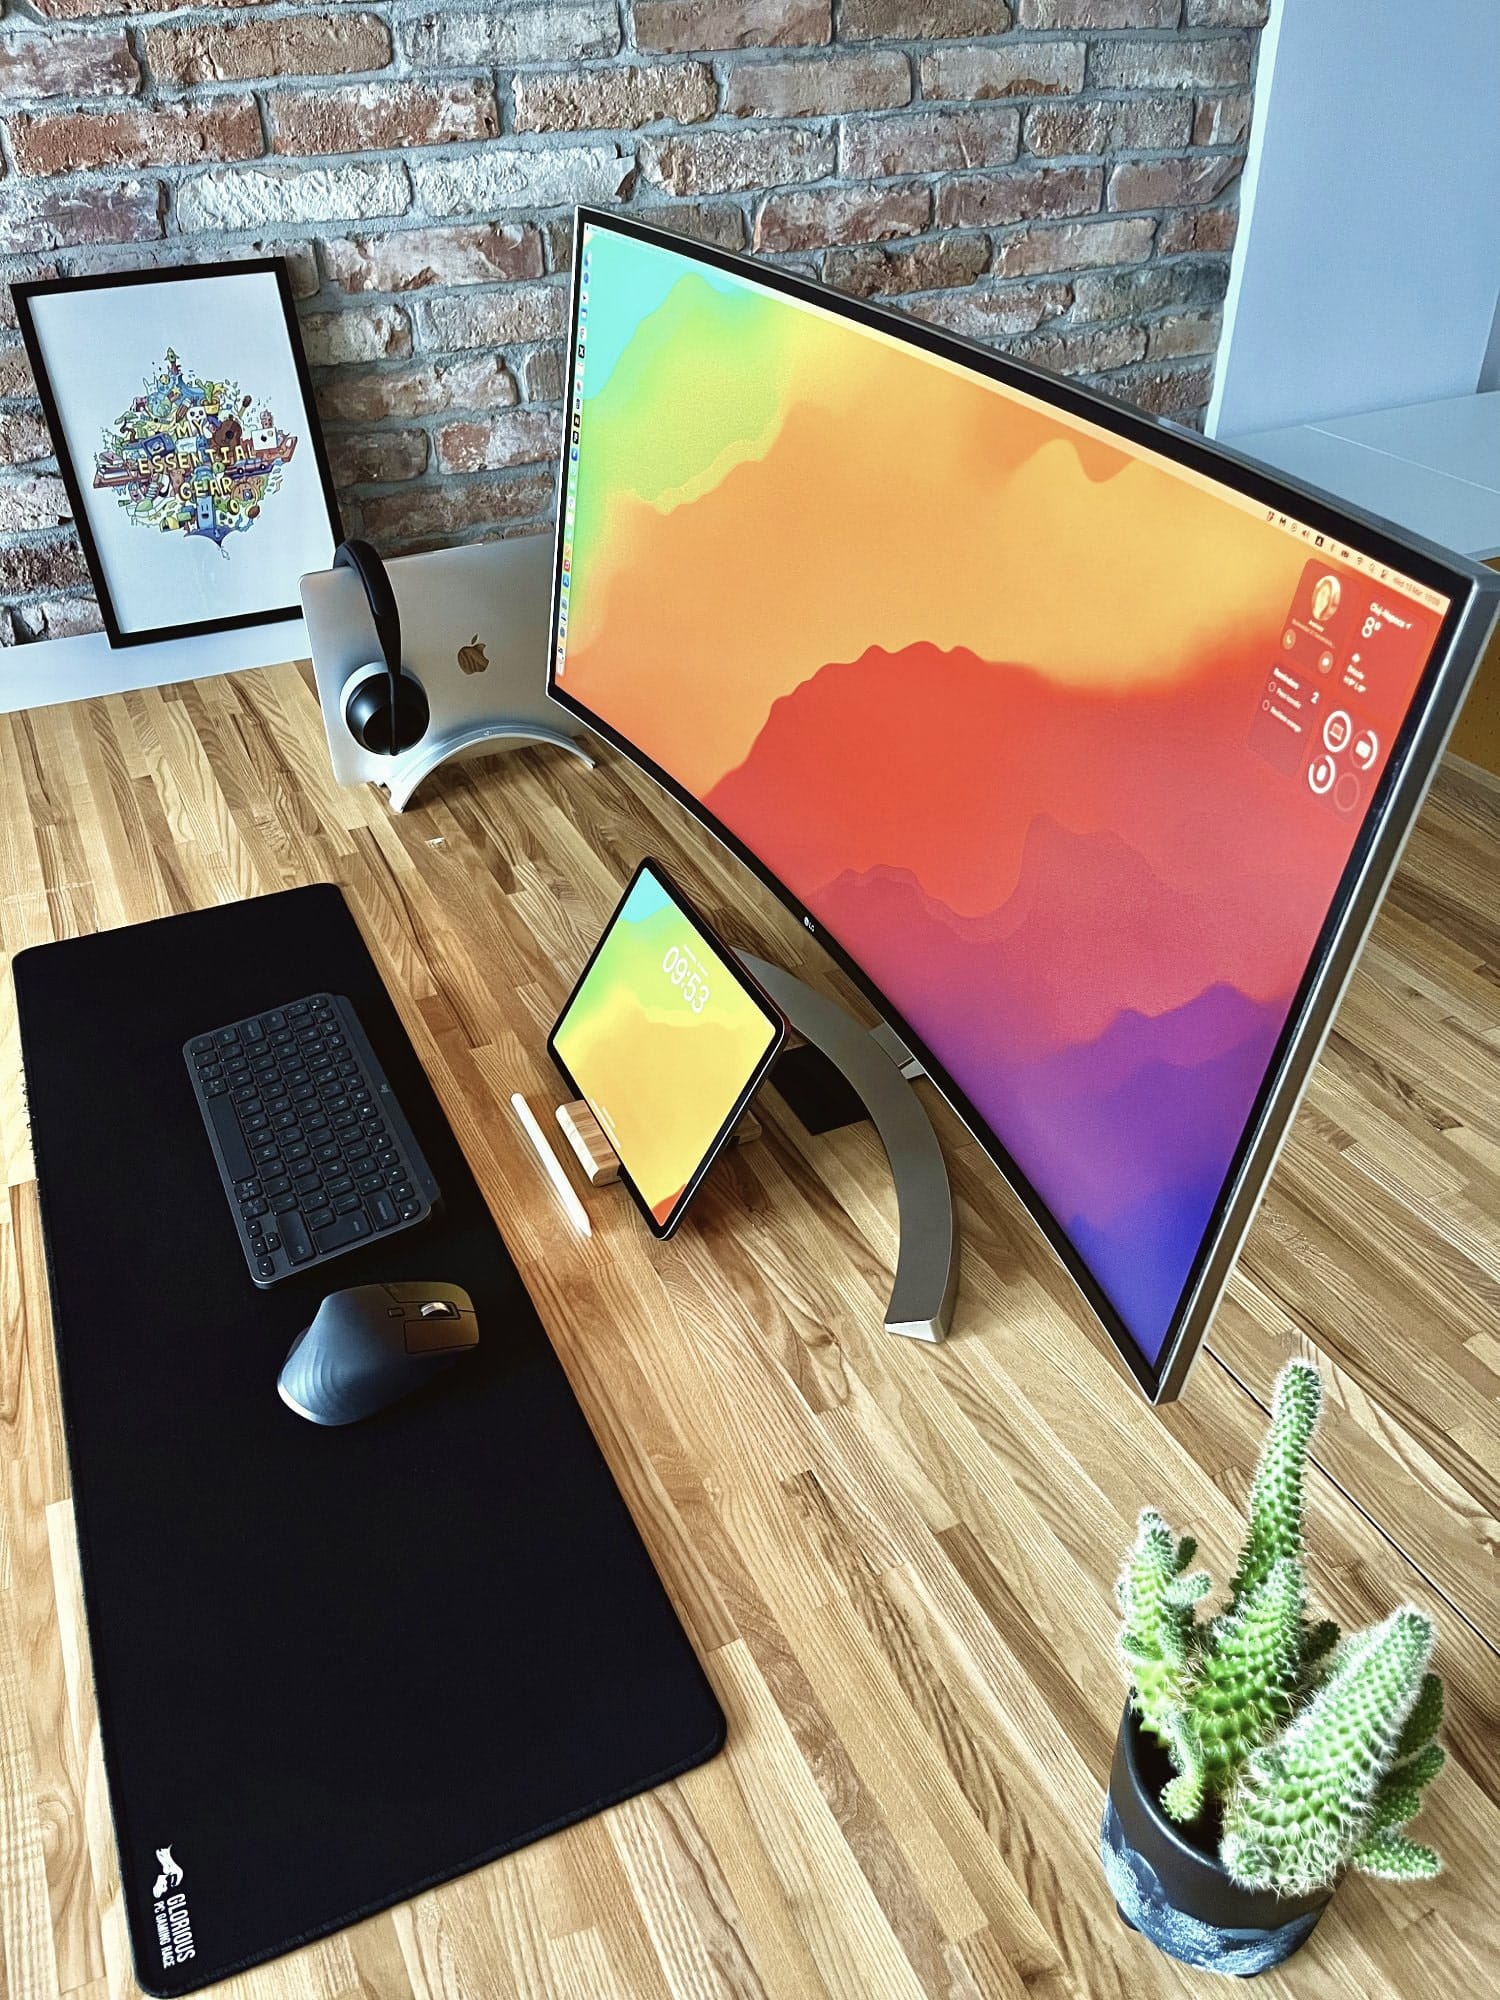 A contemporary office setup with a large curved monitor displaying vibrant wallpapers, an Apple desktop computer, wireless keyboard and mouse on a black desk pad, a framed colourful artwork, and a potted cactus on a wooden desk against a brick wall